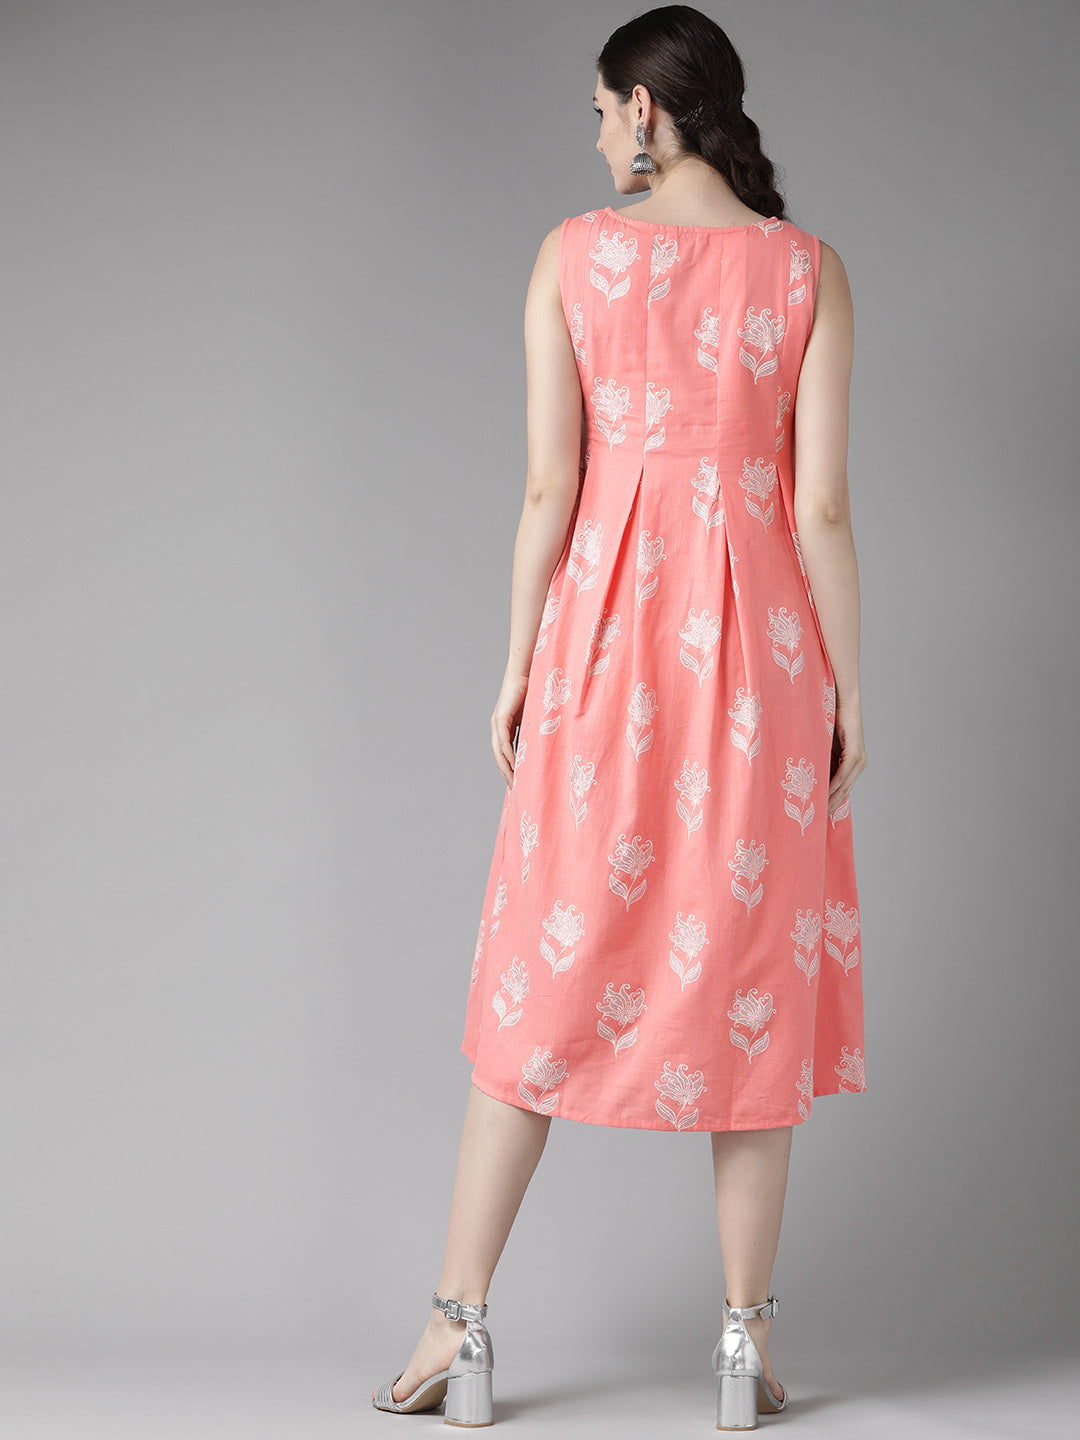 Floral Printed A-Line Dress with Box Pleats